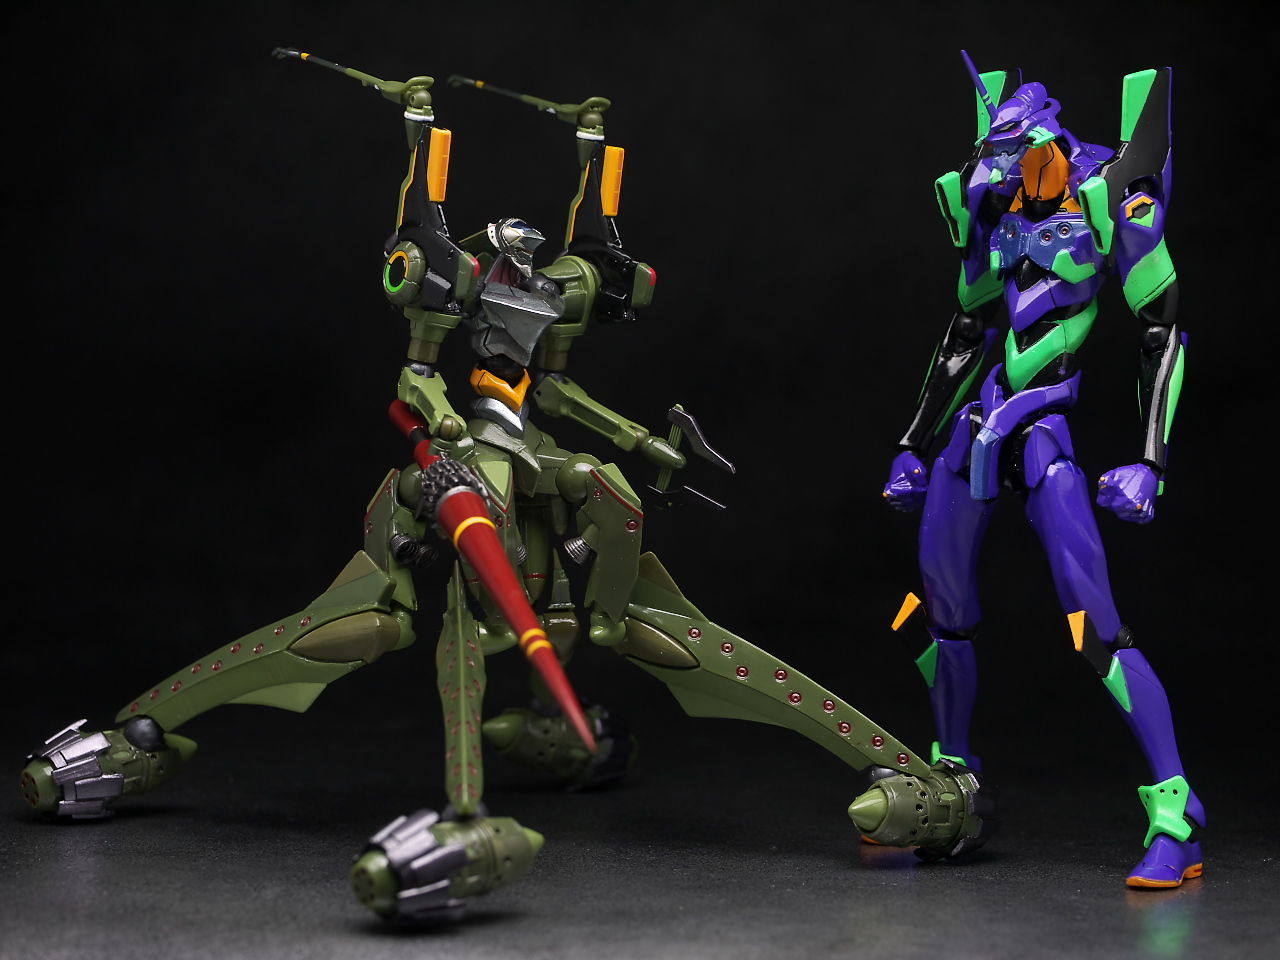 The Eva 05 figure is out of scale... 